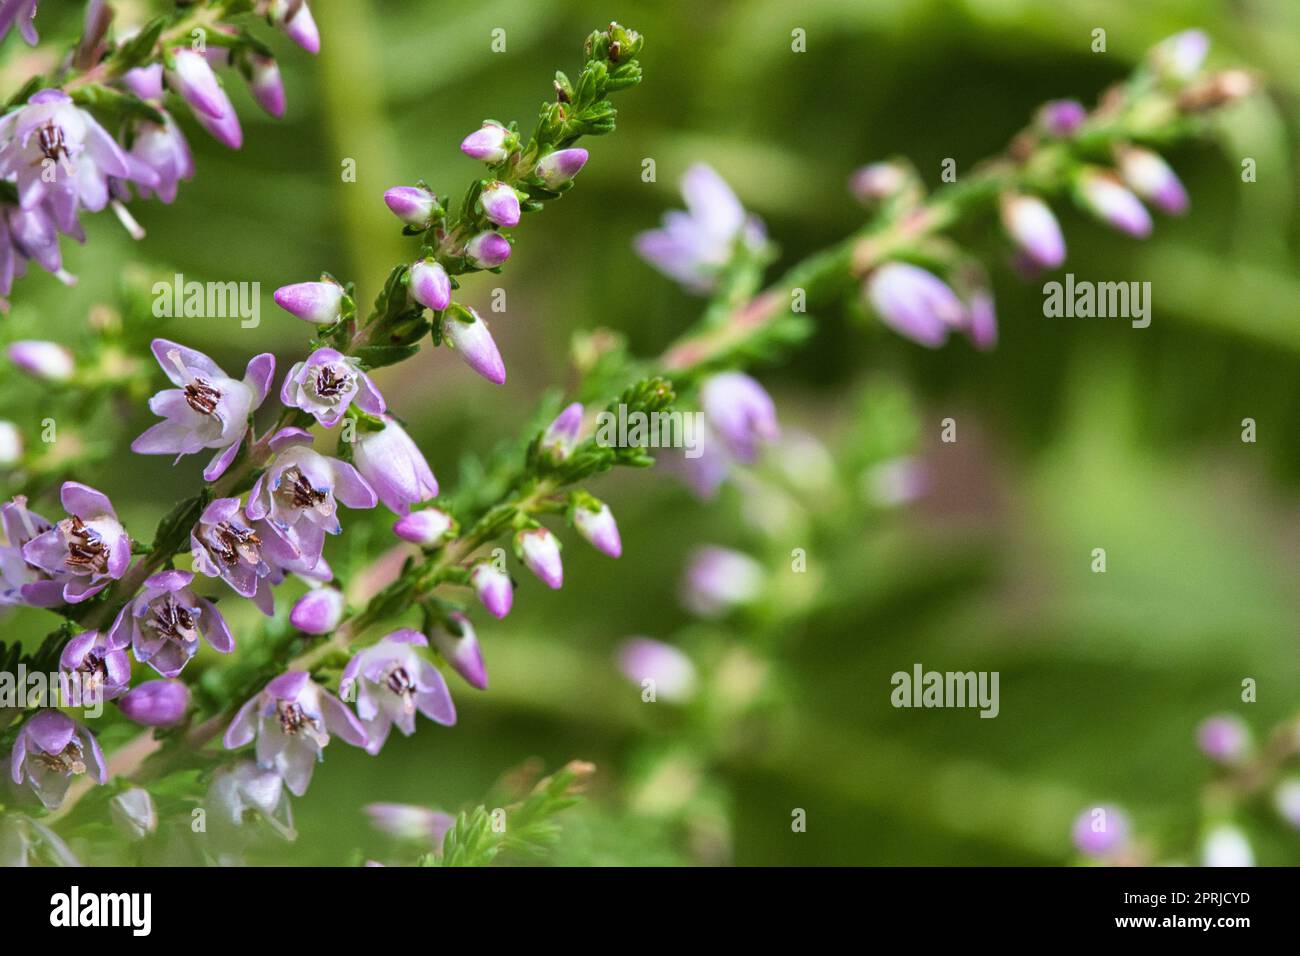 Heather. Branches with fine filigree purple flowers. Dreamy. Blurred background. Stock Photo